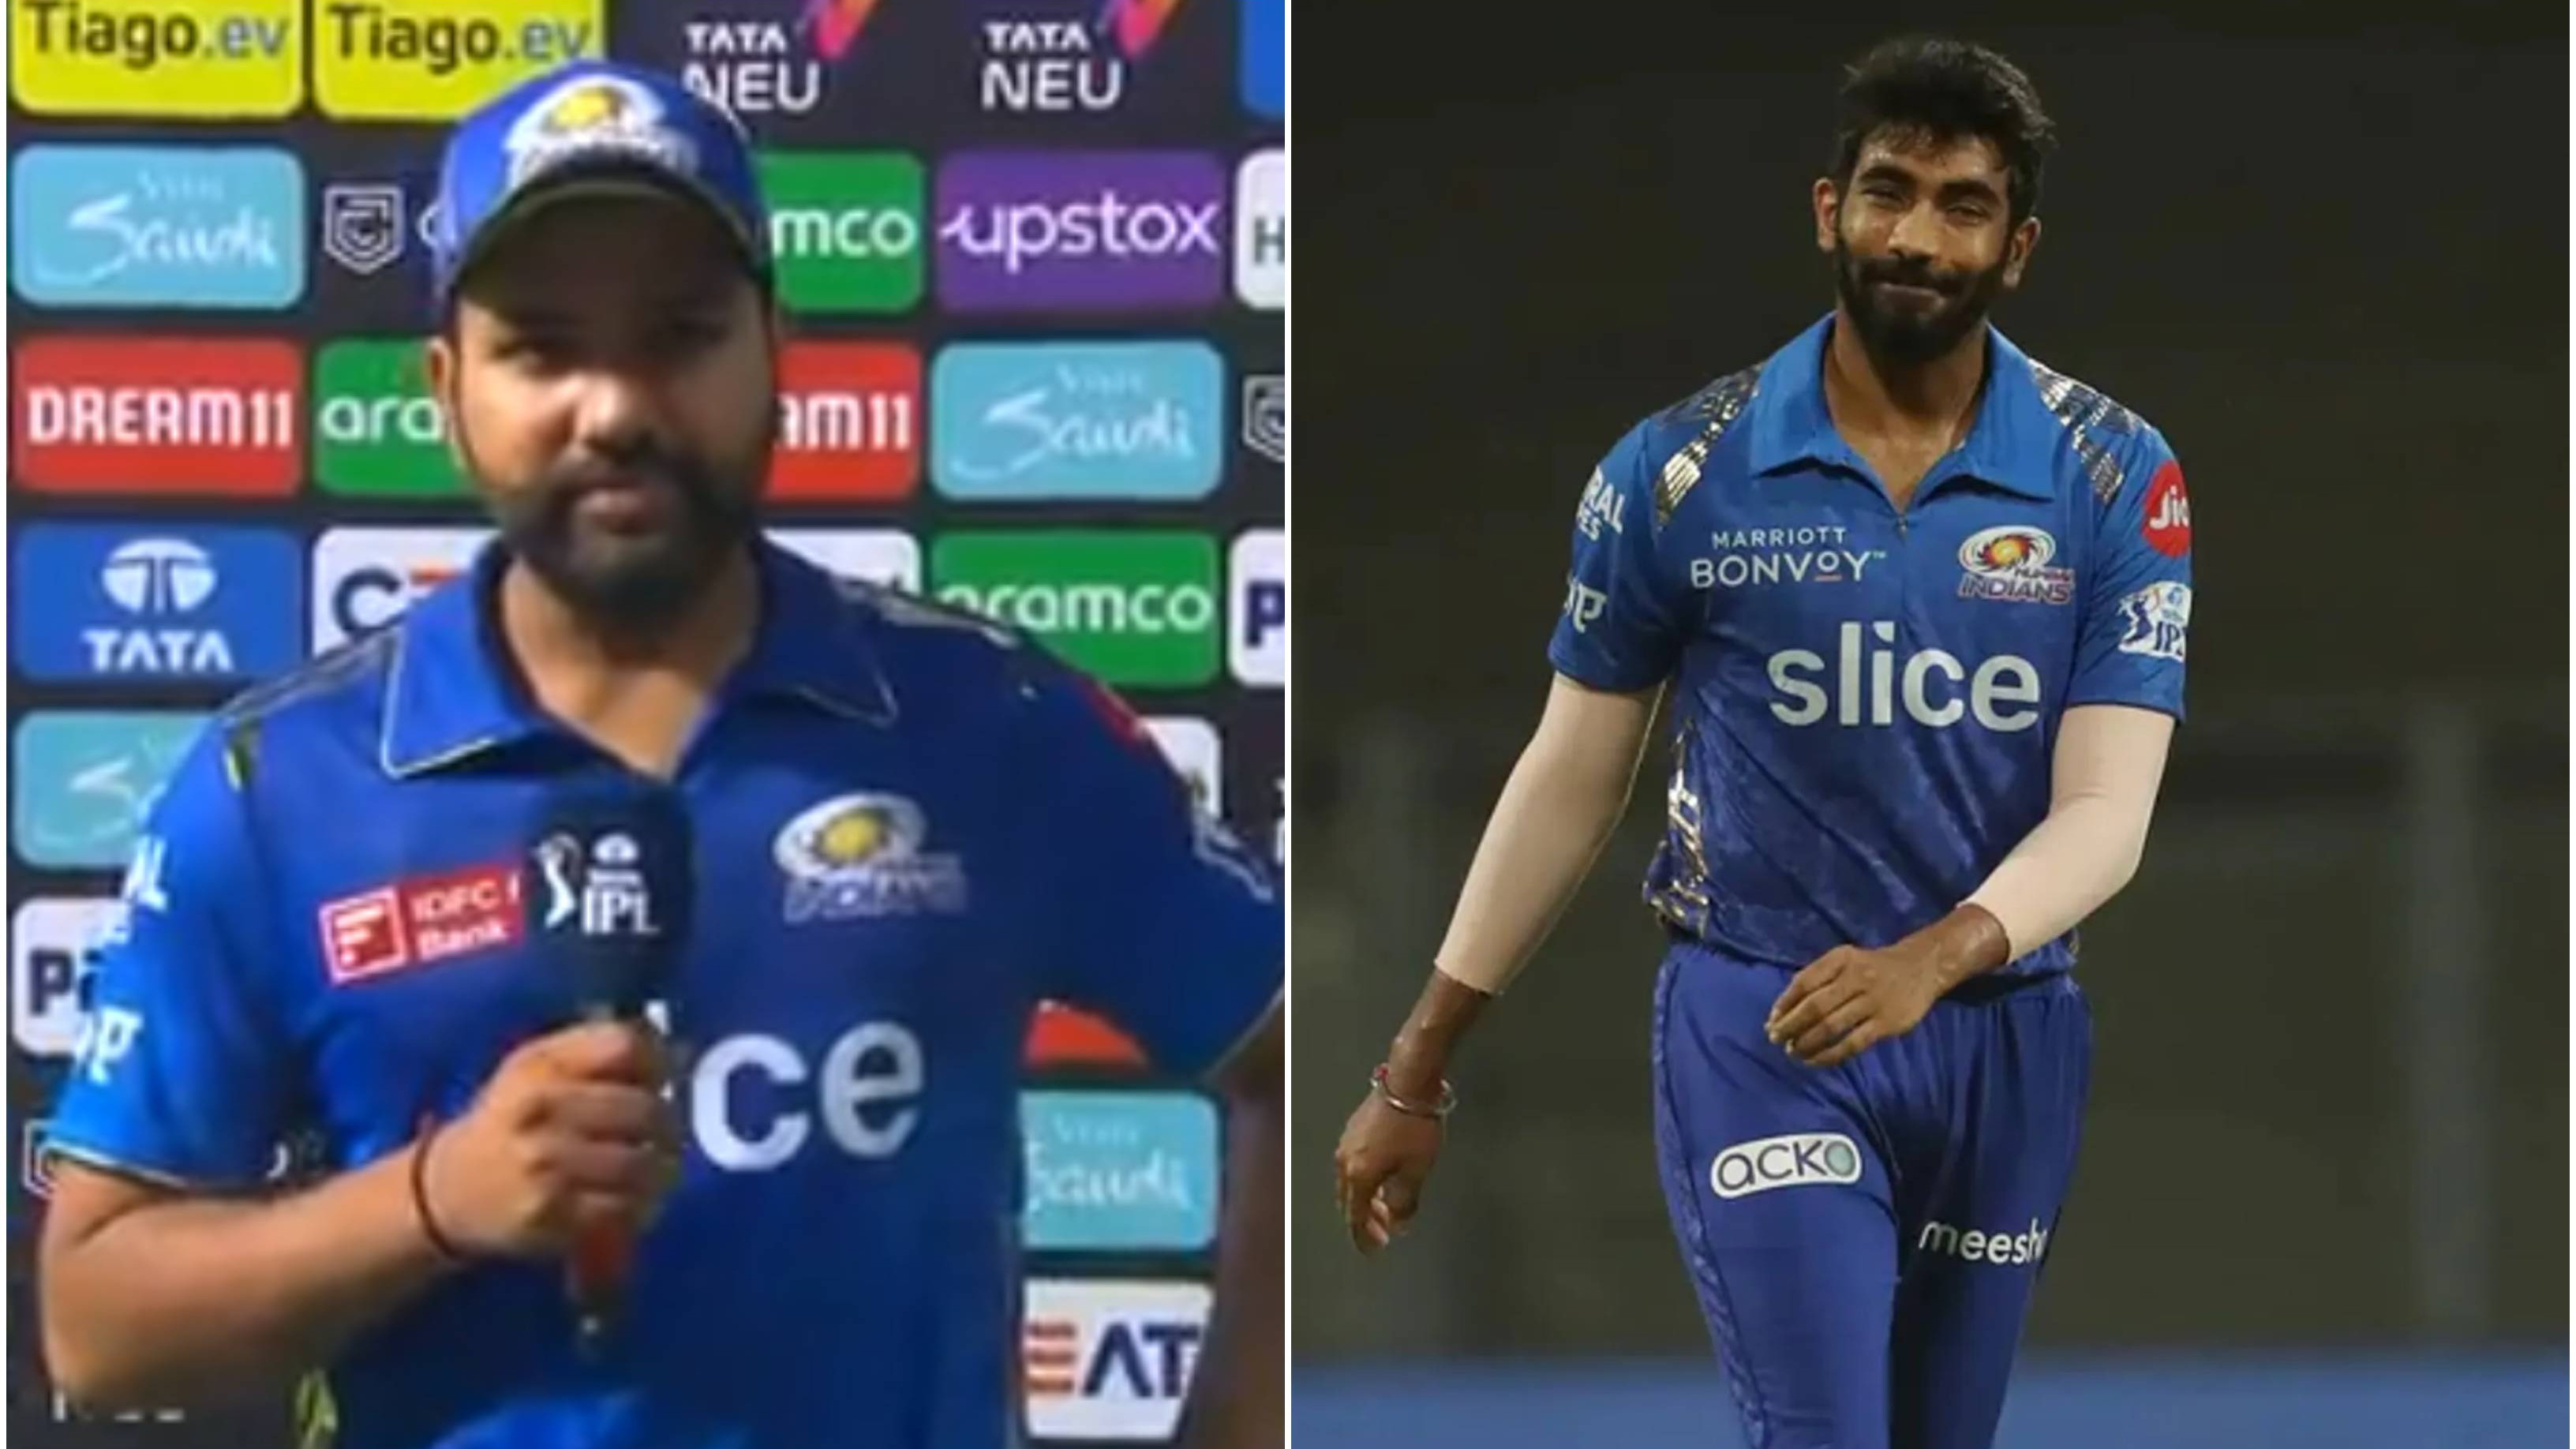 IPL 2023: Rohit Sharma says MI can’t keep dwelling on Jasprit Bumrah’s absence after huge loss against RCB